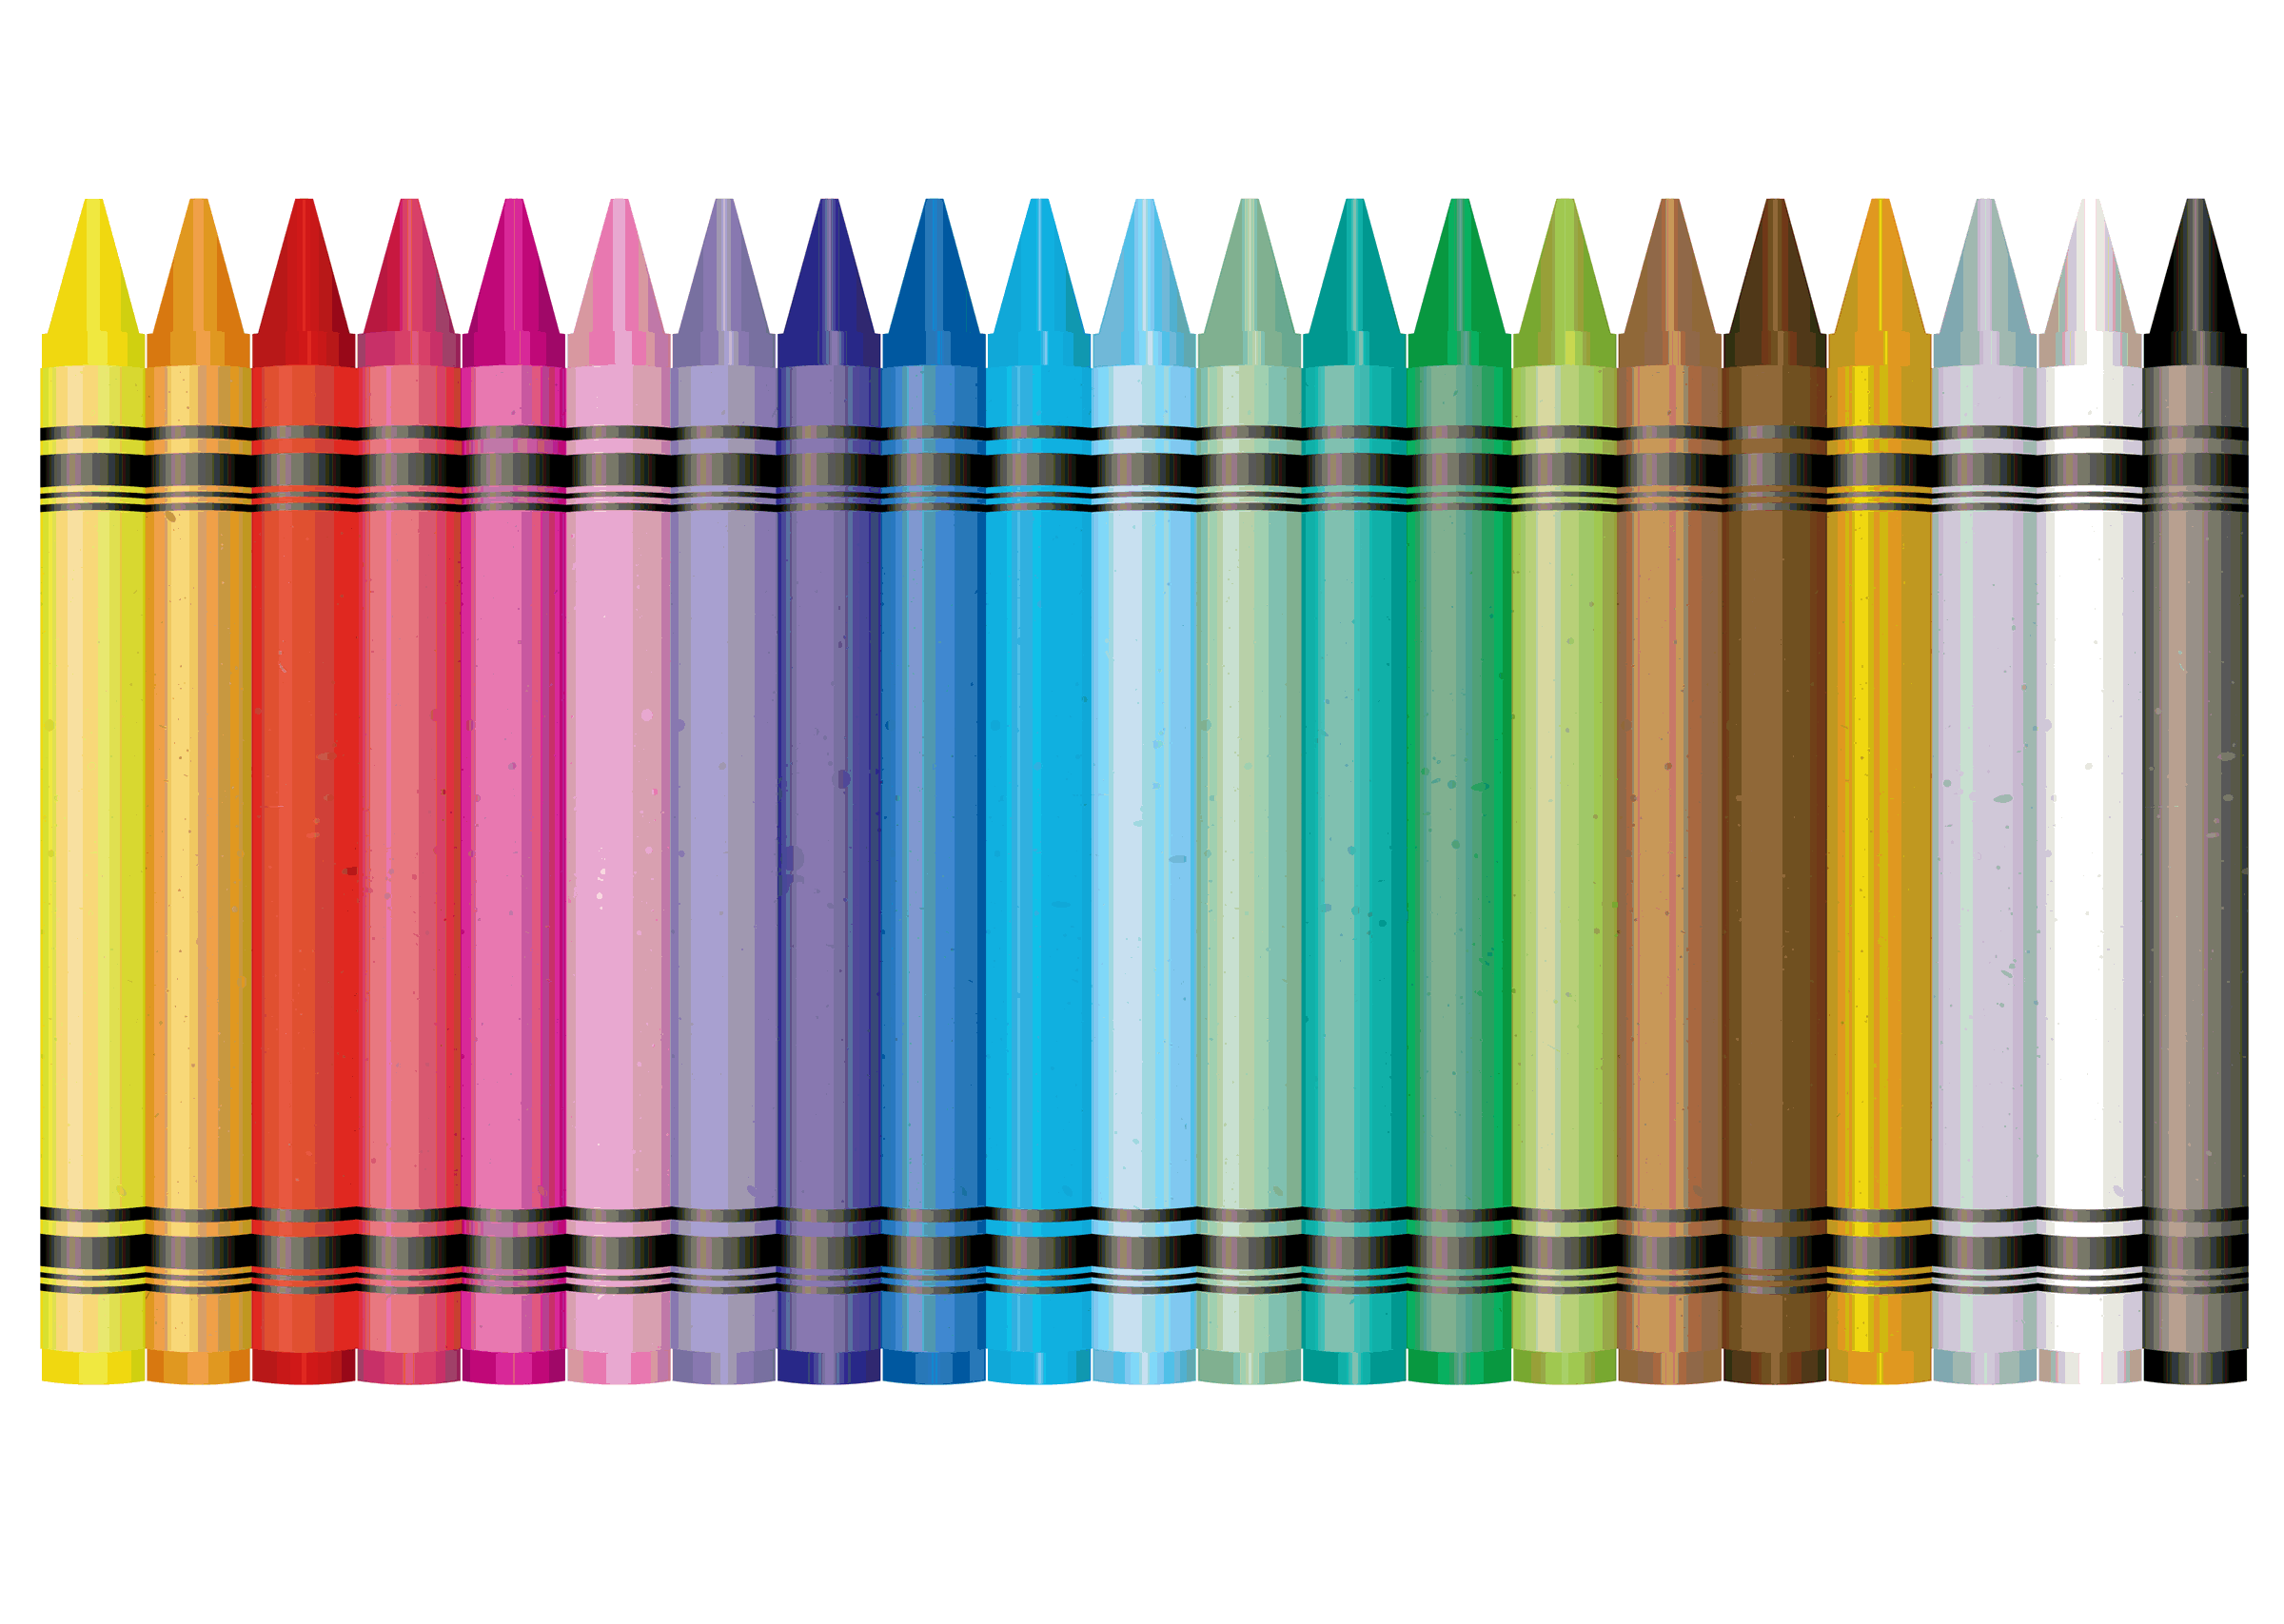 Crayons   Clipart Panda   Free Clipart Images